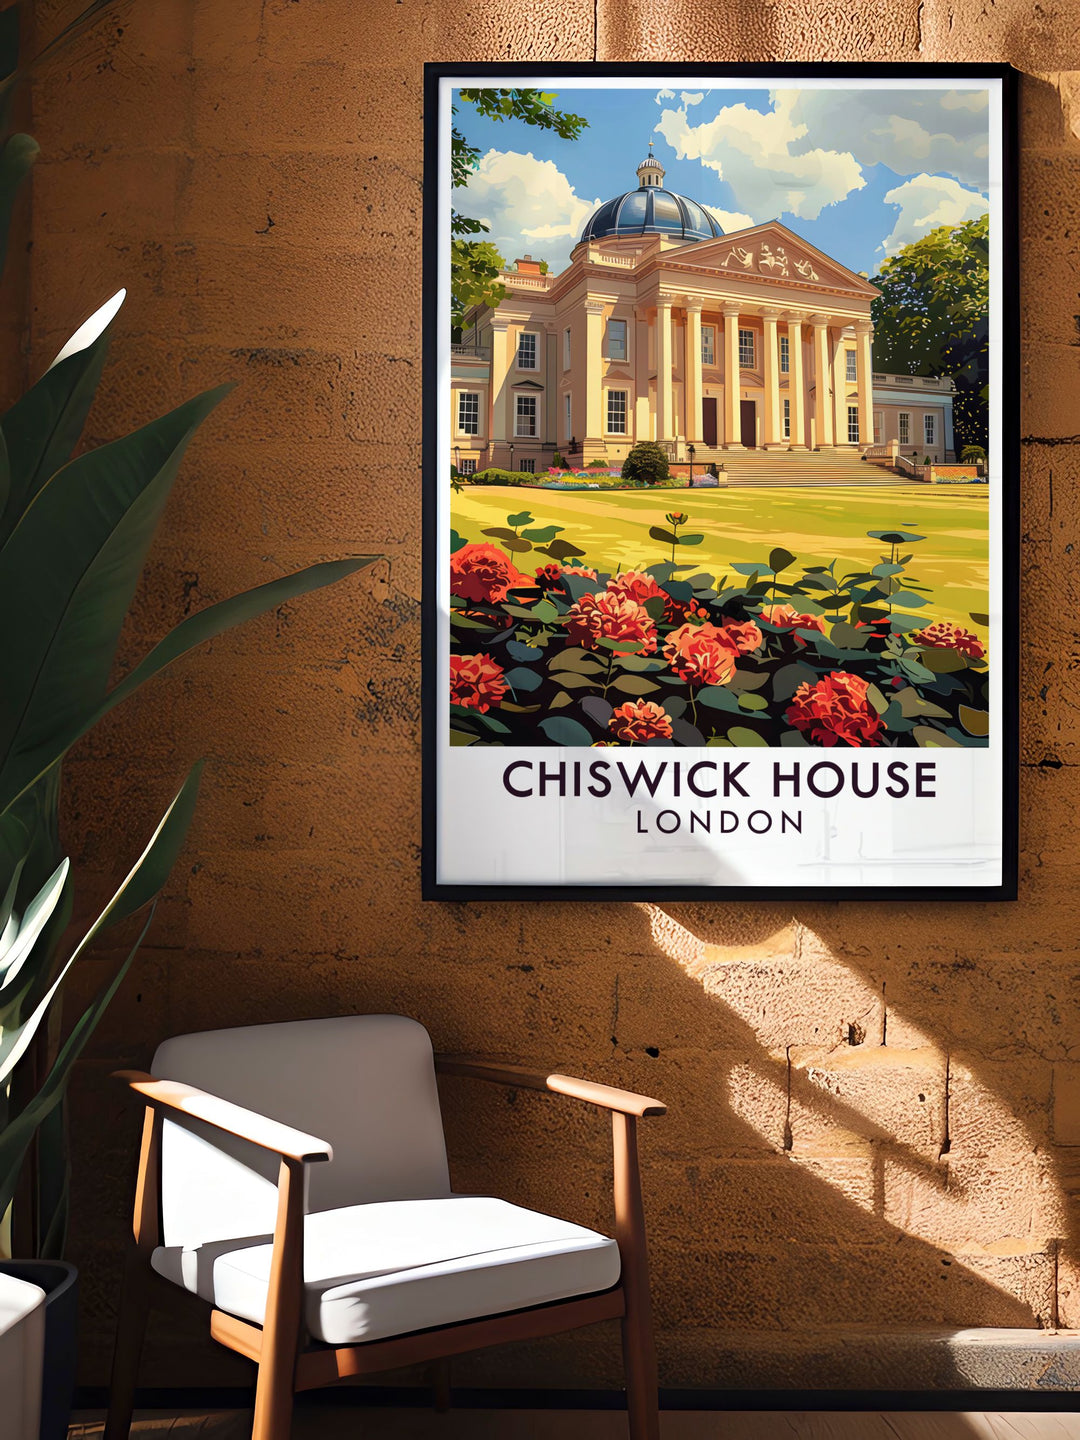 Relax in the tranquil surroundings of Chiswick House Gardens, an early example of the English landscape garden style, offering a harmonious blend of nature and art.